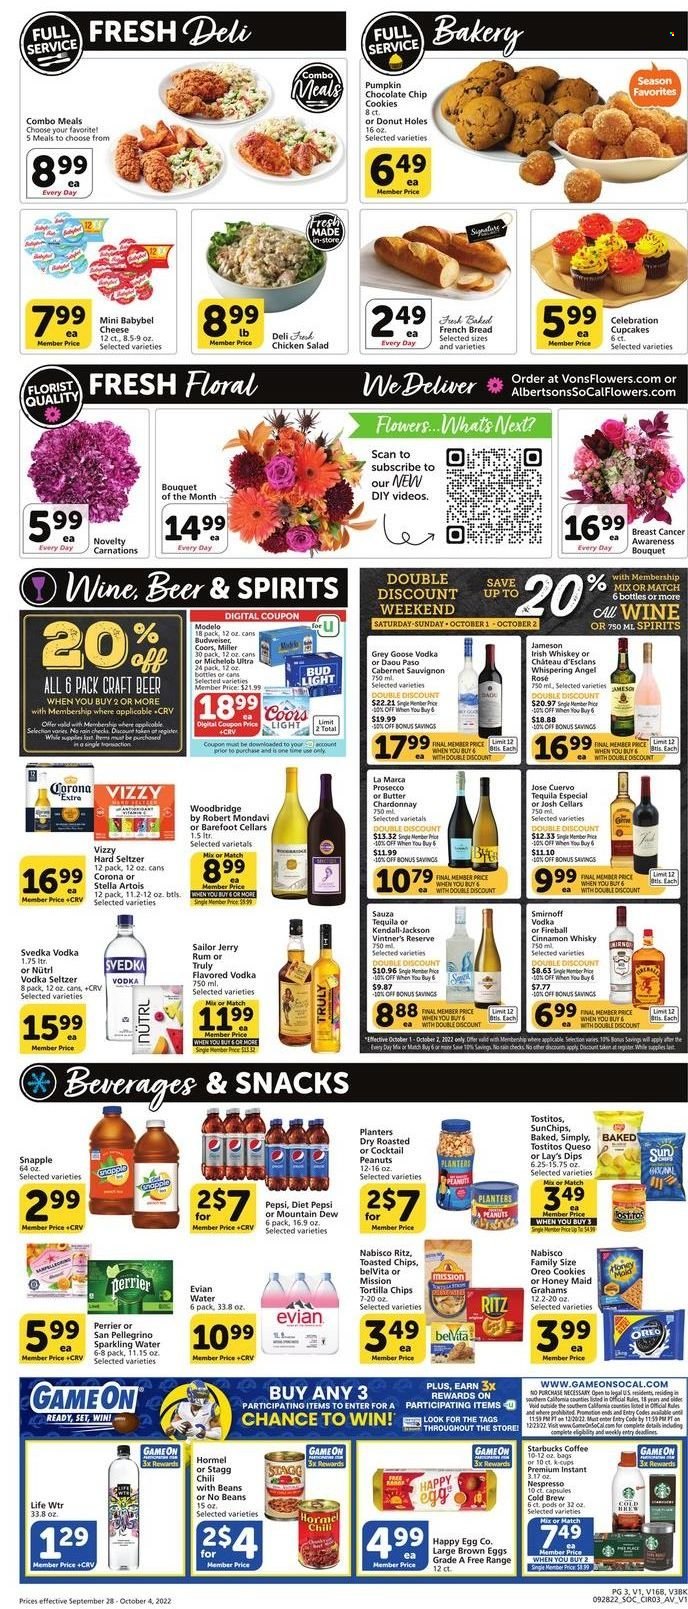 thumbnail - Vons Flyer - 09/28/2022 - 10/04/2022 - Sales products - bread, french bread, cupcake, donut holes, pumpkin, salad, Hormel, chicken salad, cheese, Babybel, Oreo, eggs, butter, cookies, snack, Celebration, RITZ, tortilla chips, chips, Lay’s, Tostitos, belVita, Honey Maid, peanuts, Planters, Mountain Dew, Pepsi, Diet Pepsi, Snapple, Perrier, sparkling water, Evian, San Pellegrino, coffee, Starbucks, Nespresso, coffee capsules, K-Cups, Cabernet Sauvignon, red wine, prosecco, Woodbridge by Robert Mondavi, Woodbridge, rosé wine, rum, Smirnoff, tequila, vodka, whiskey, irish whiskey, Jameson, Hard Seltzer, TRULY, cinnamon whisky, whisky, beer, Bud Light, Corona Extra, Miller, Modelo, bouquet, Budweiser, Stella Artois, Coors, Michelob. Page 3.